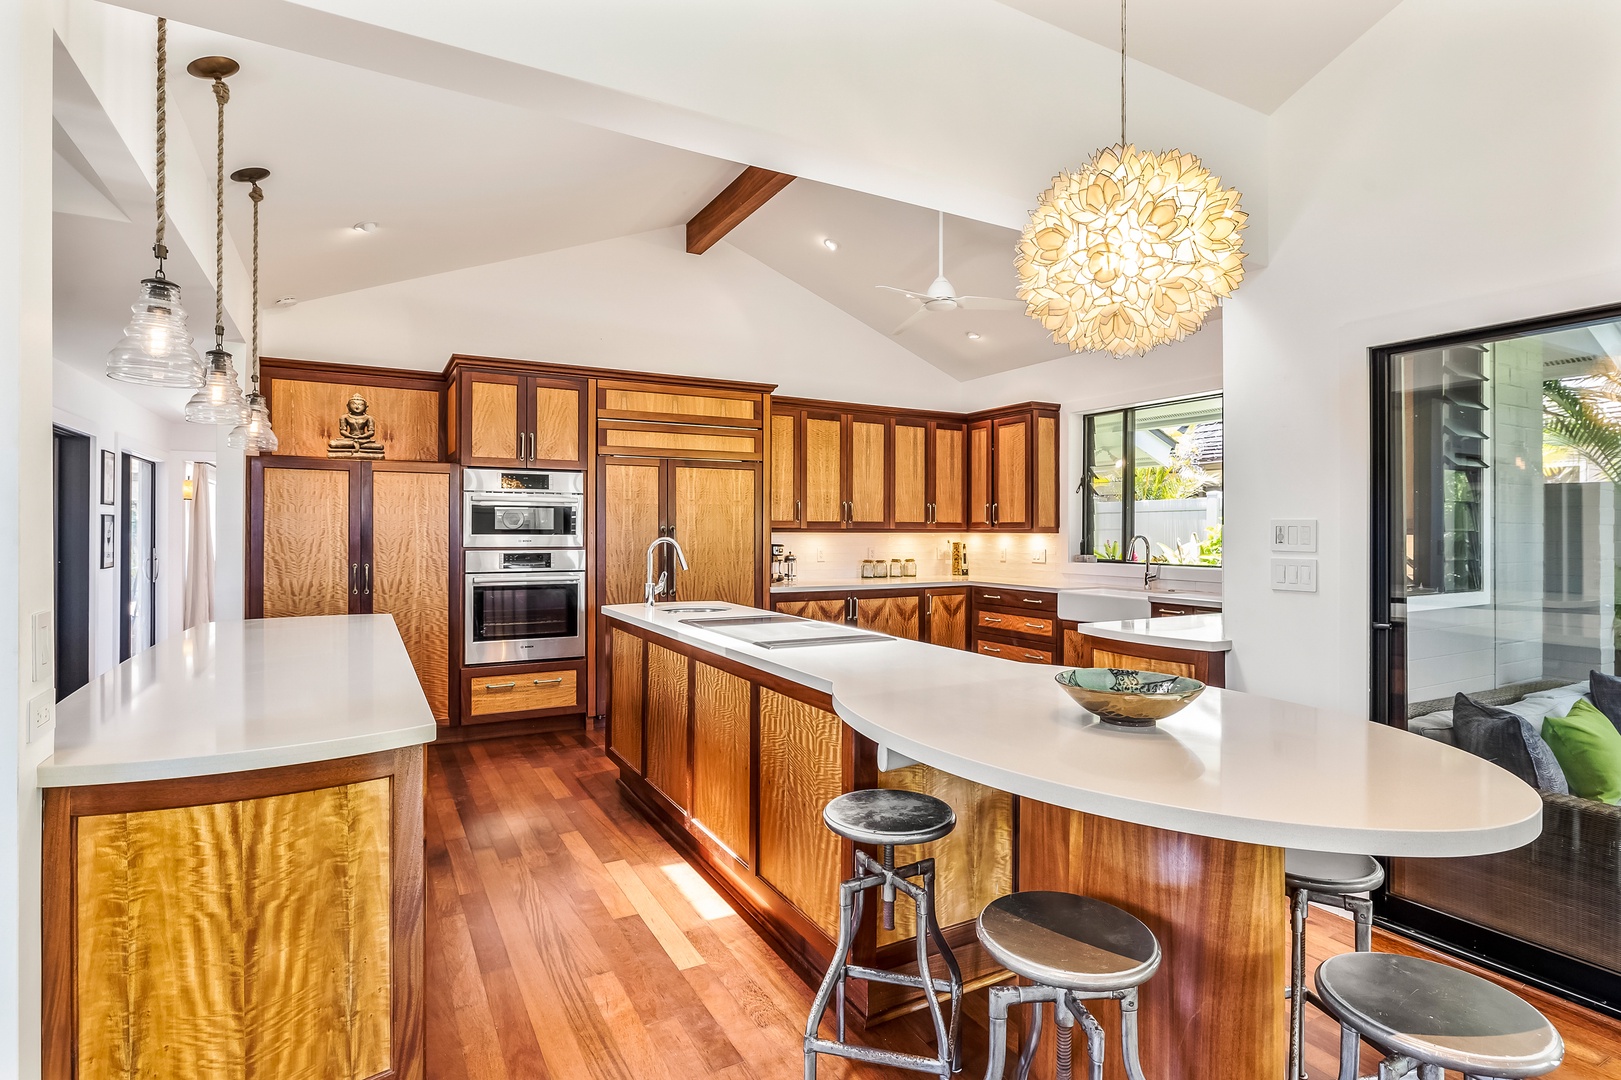 Kailua Vacation Rentals, Hale Ohana - There's breakfast bar seating at the round edge of the island